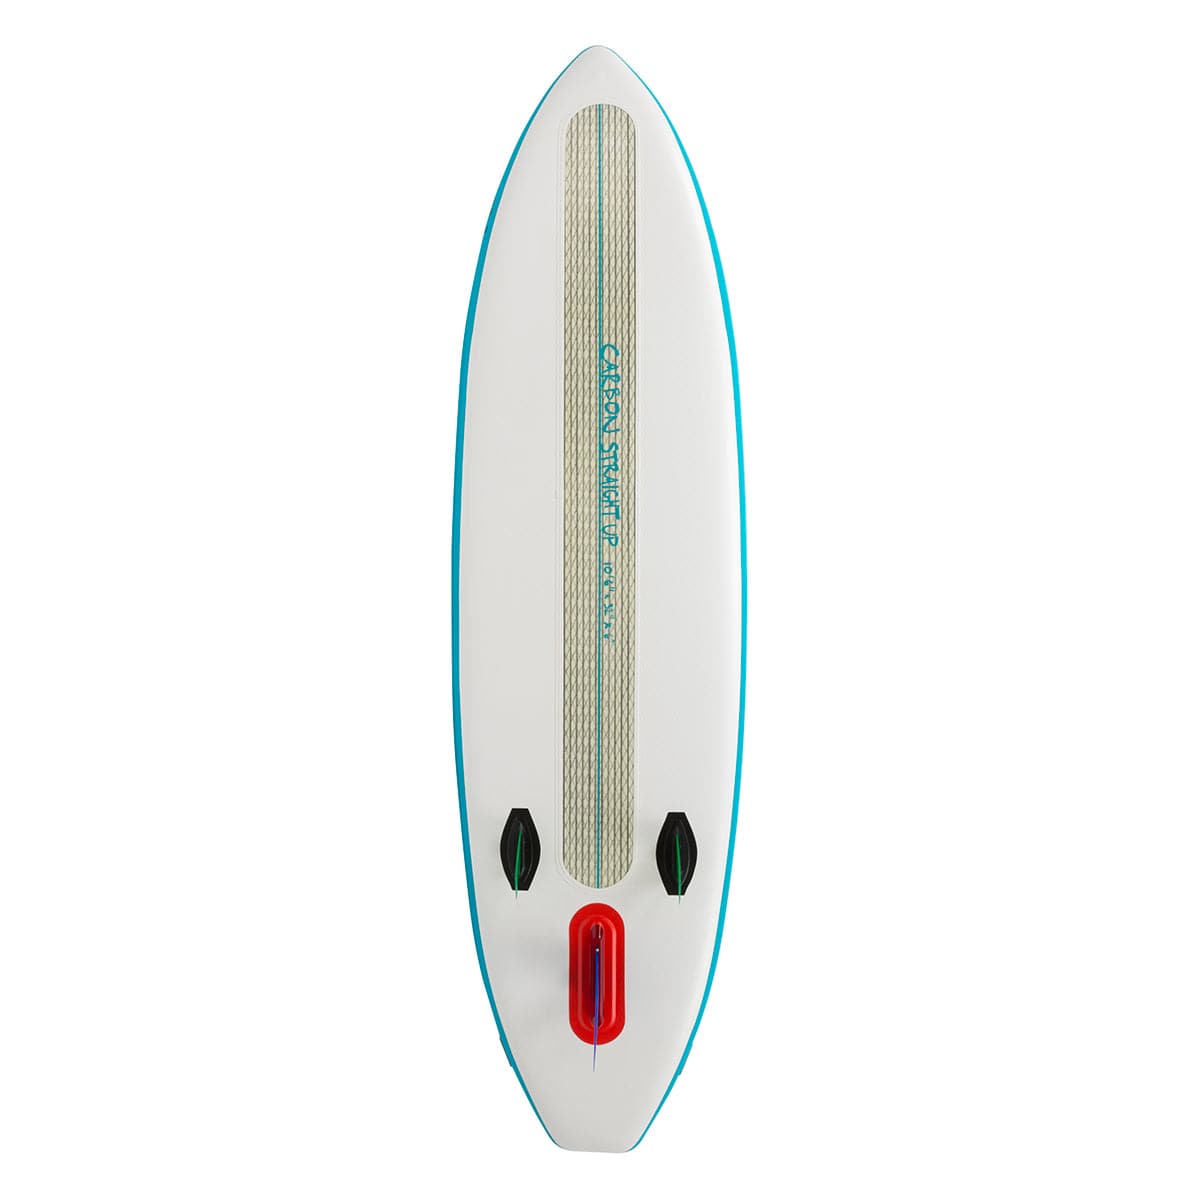 Featuring the Carbon Straight Up 10'6 Inflatable SUP inflatable sup manufactured by Hala shown here from a second angle.